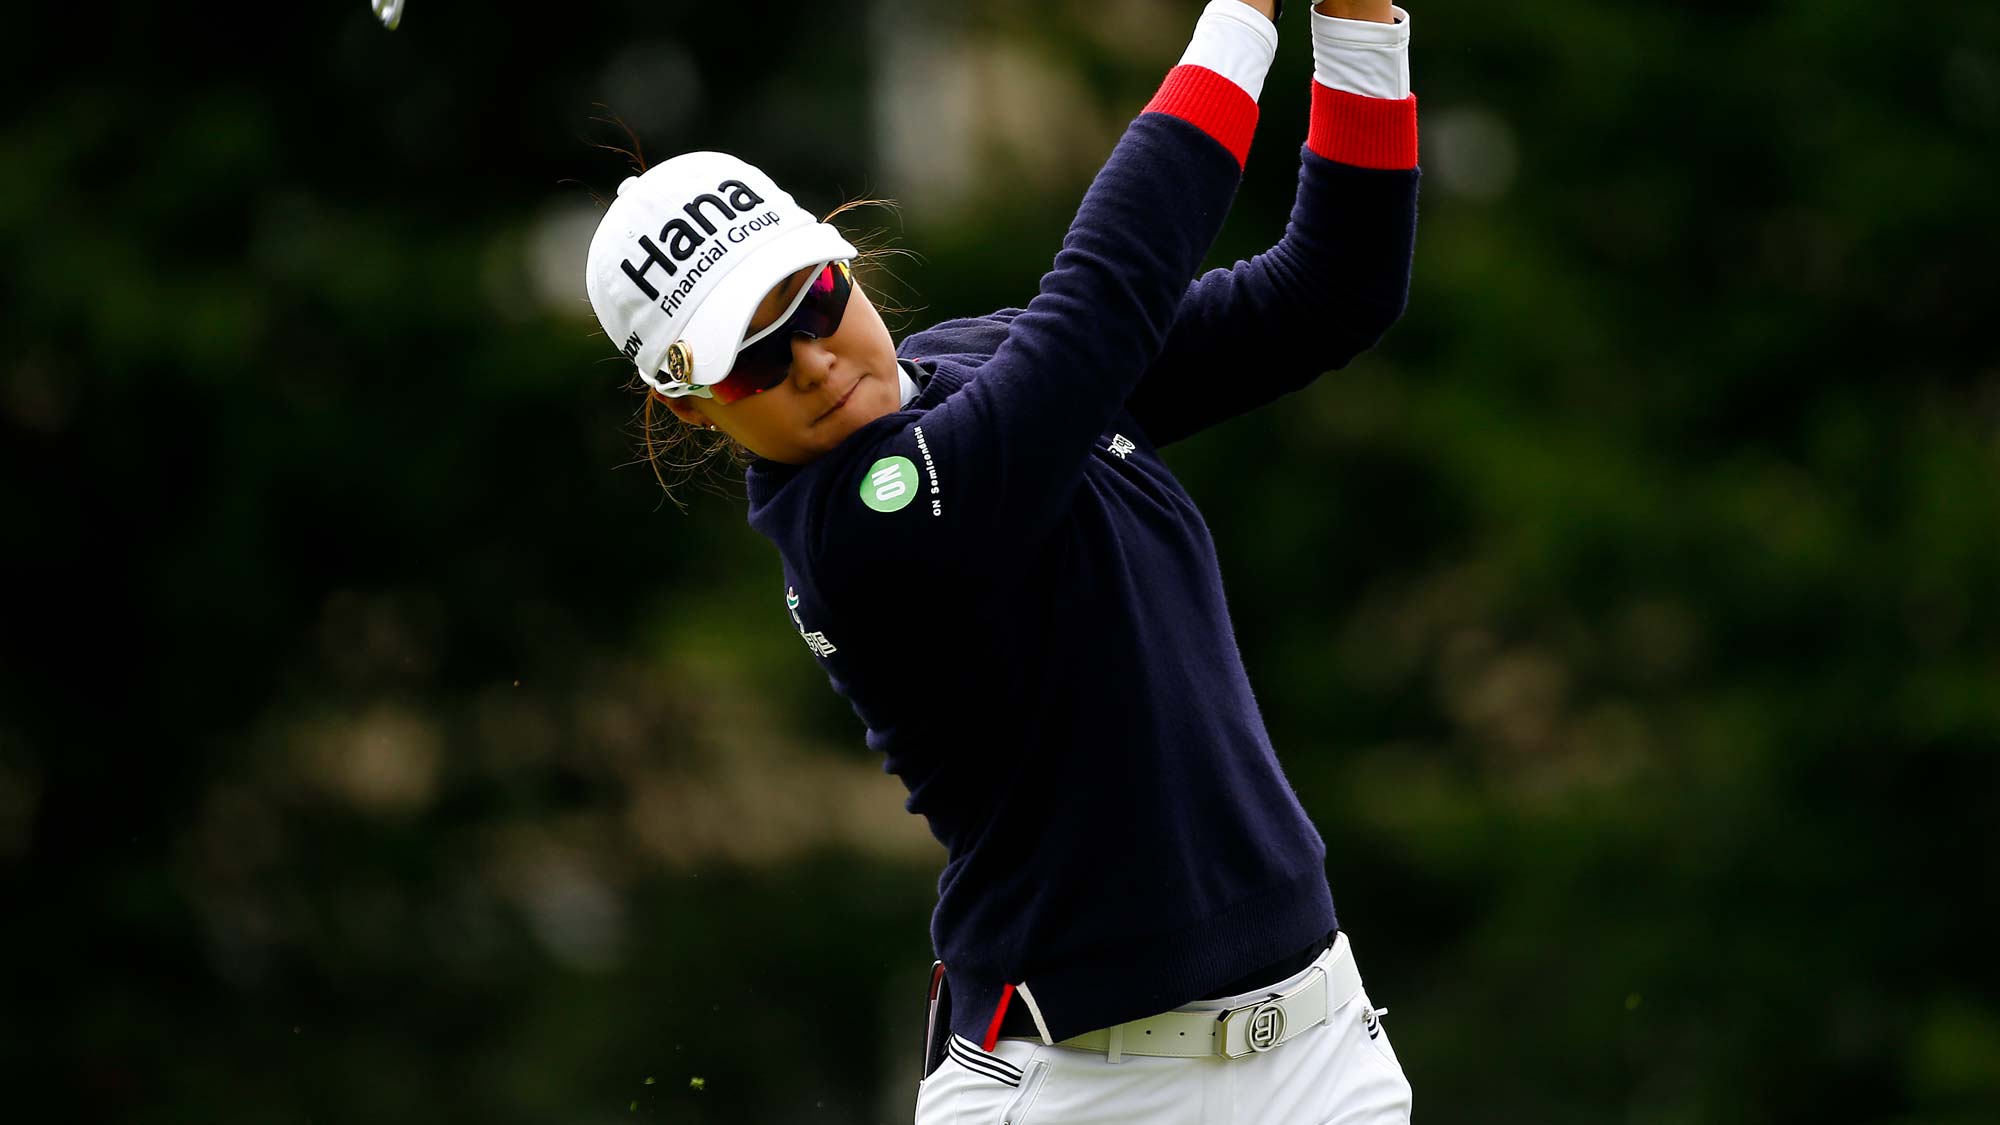 Minjee Lee of Australia tees of on the 3rd hole during the final round of the LPGA Mediheal Championship